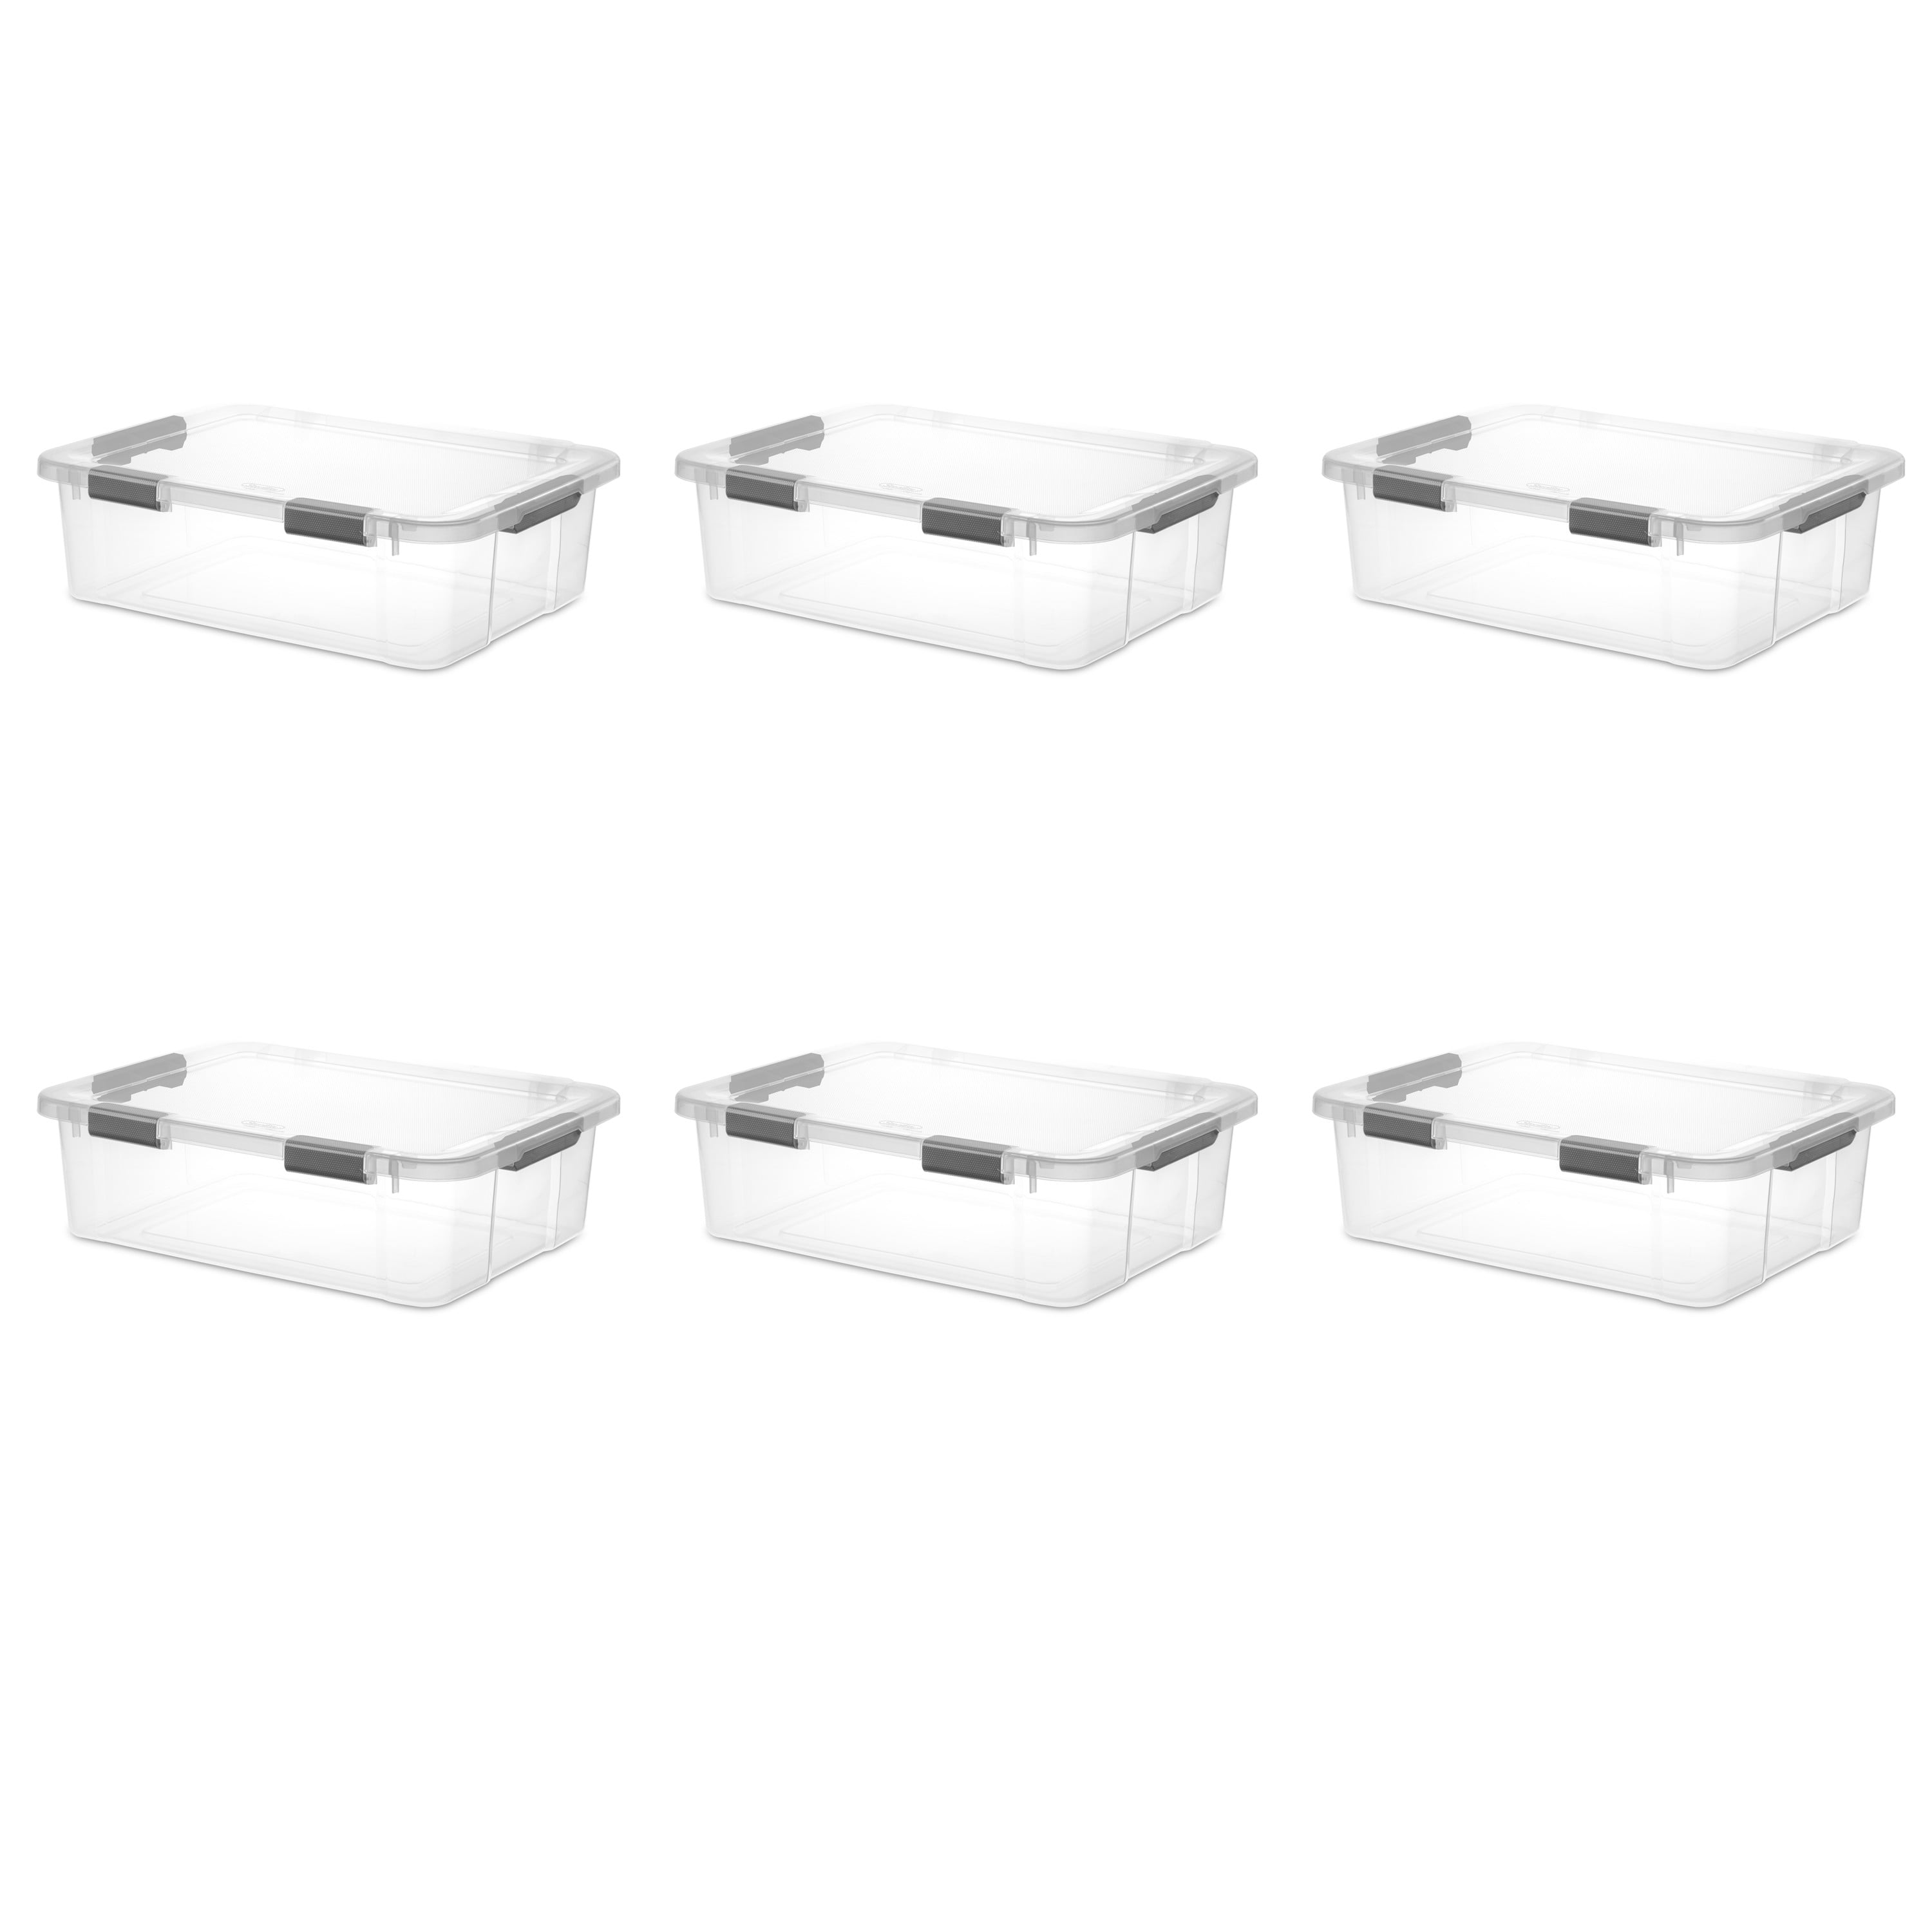 40 Pack] Plastic Containers With Lids Set - Freezer Containers